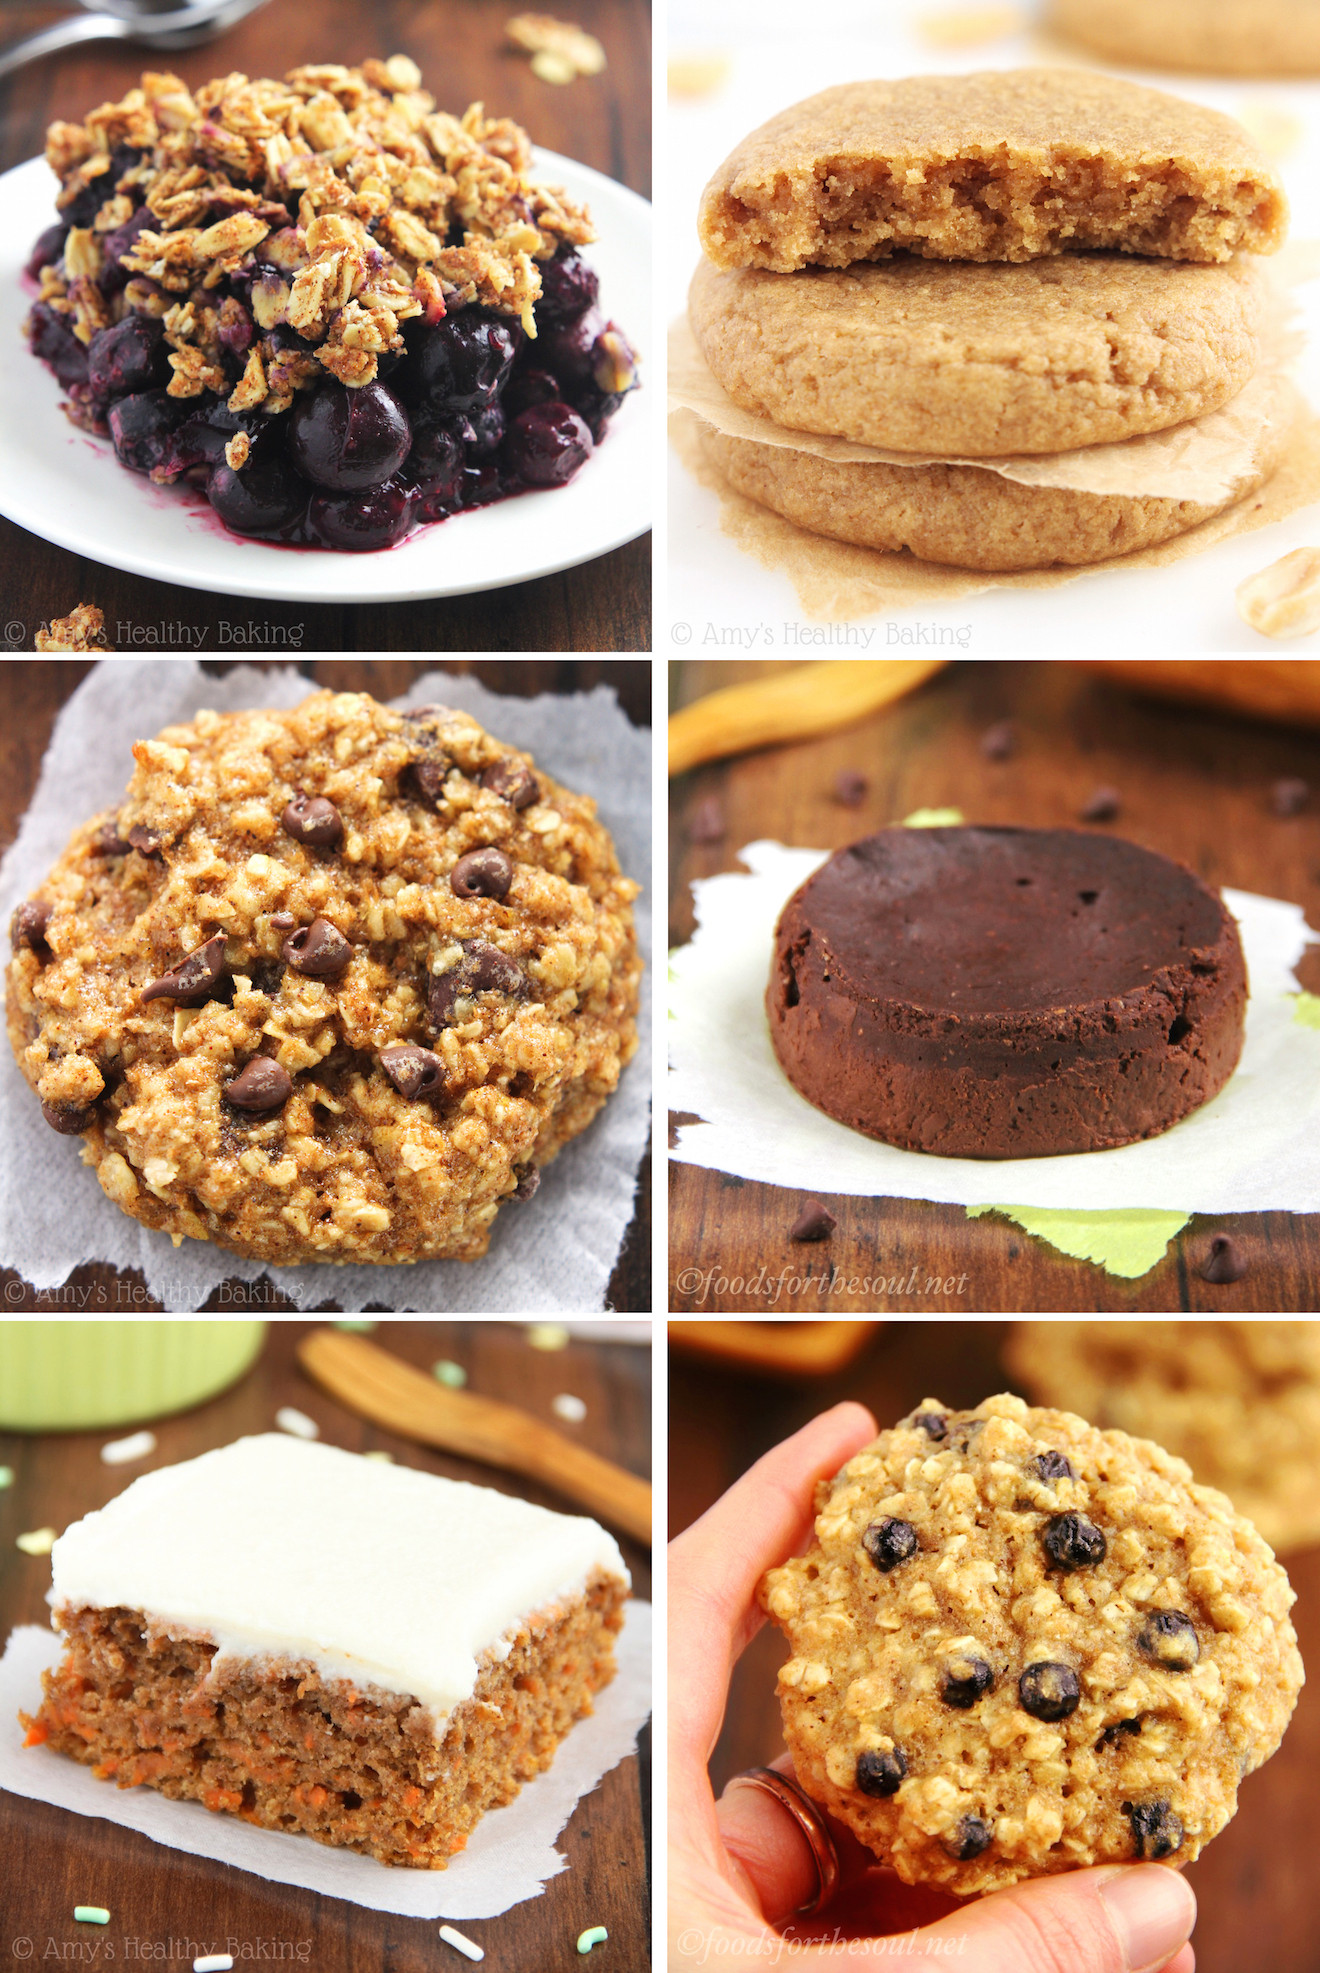 Best Healthy Desserts
 The 32 Best Healthy Desserts for Your New Year s